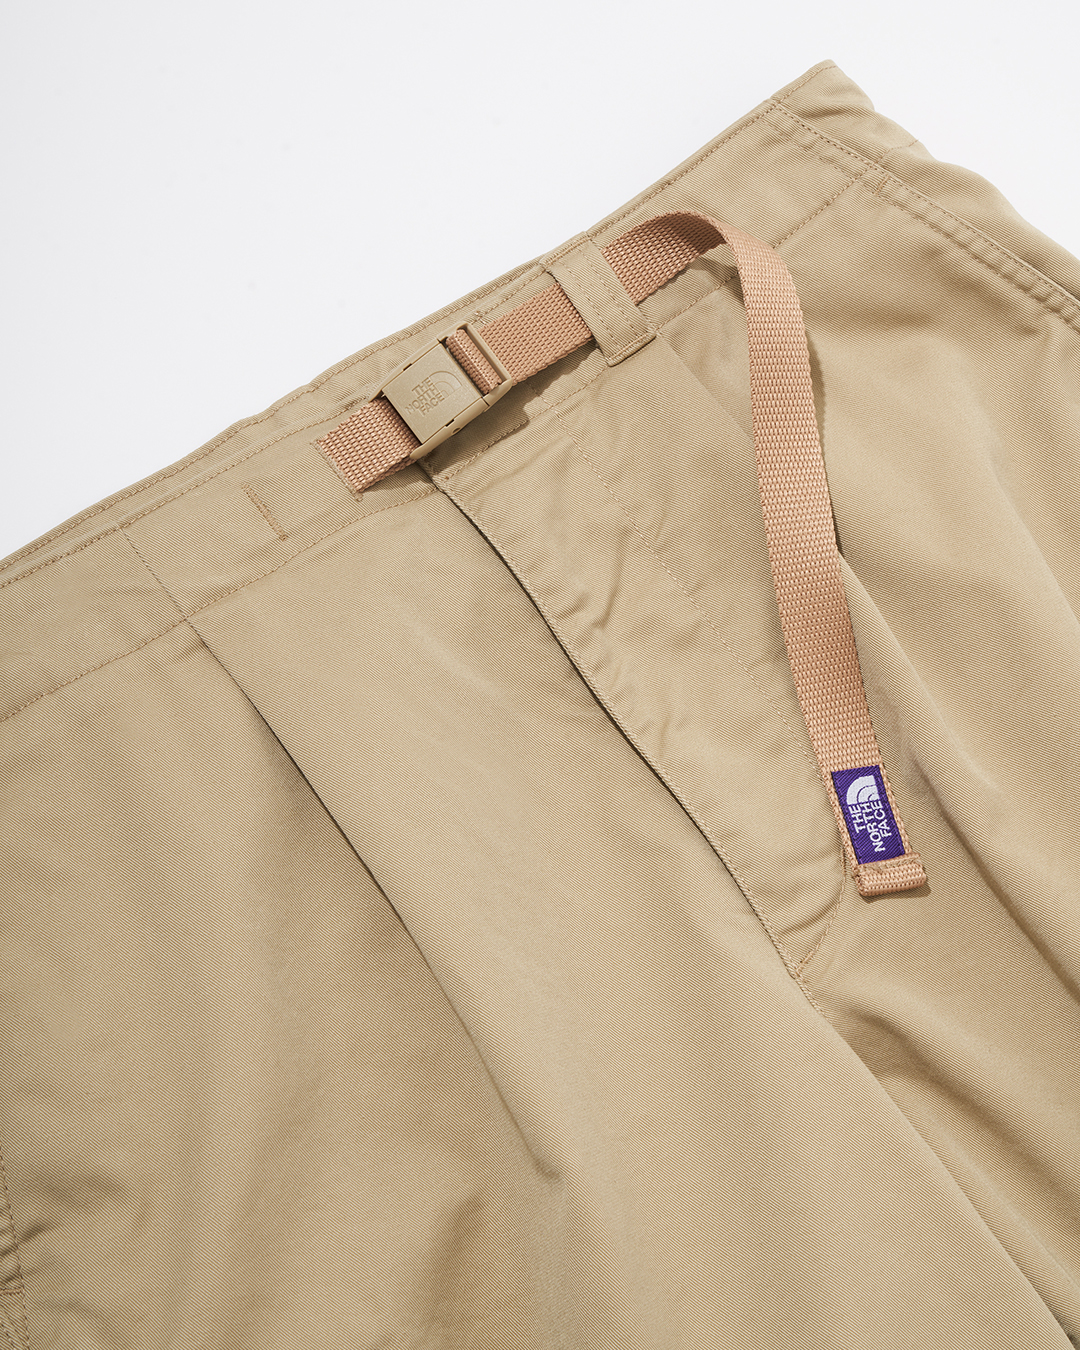 nanamica / THE NORTH FACE PURPLE LABEL / Featured Product vol.21